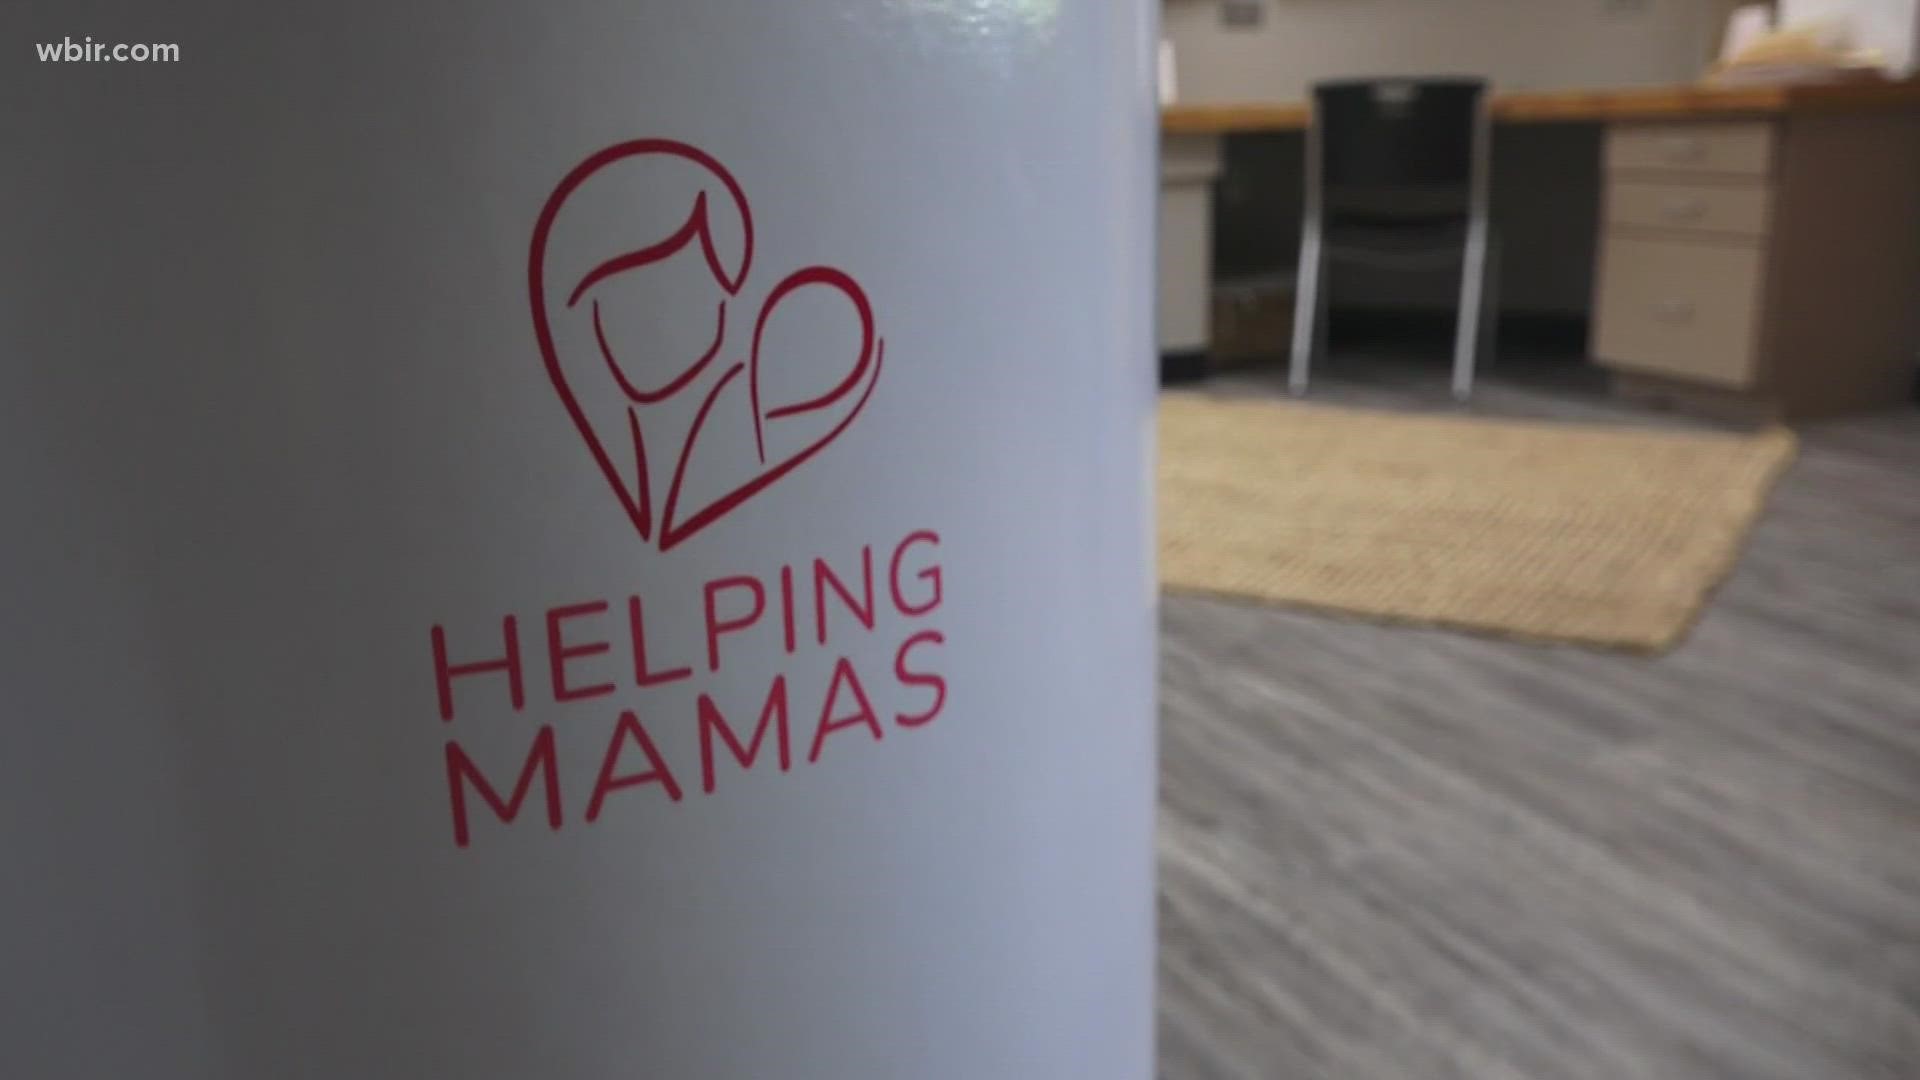 Mothers are supporting each other through support and much-needed supplies.